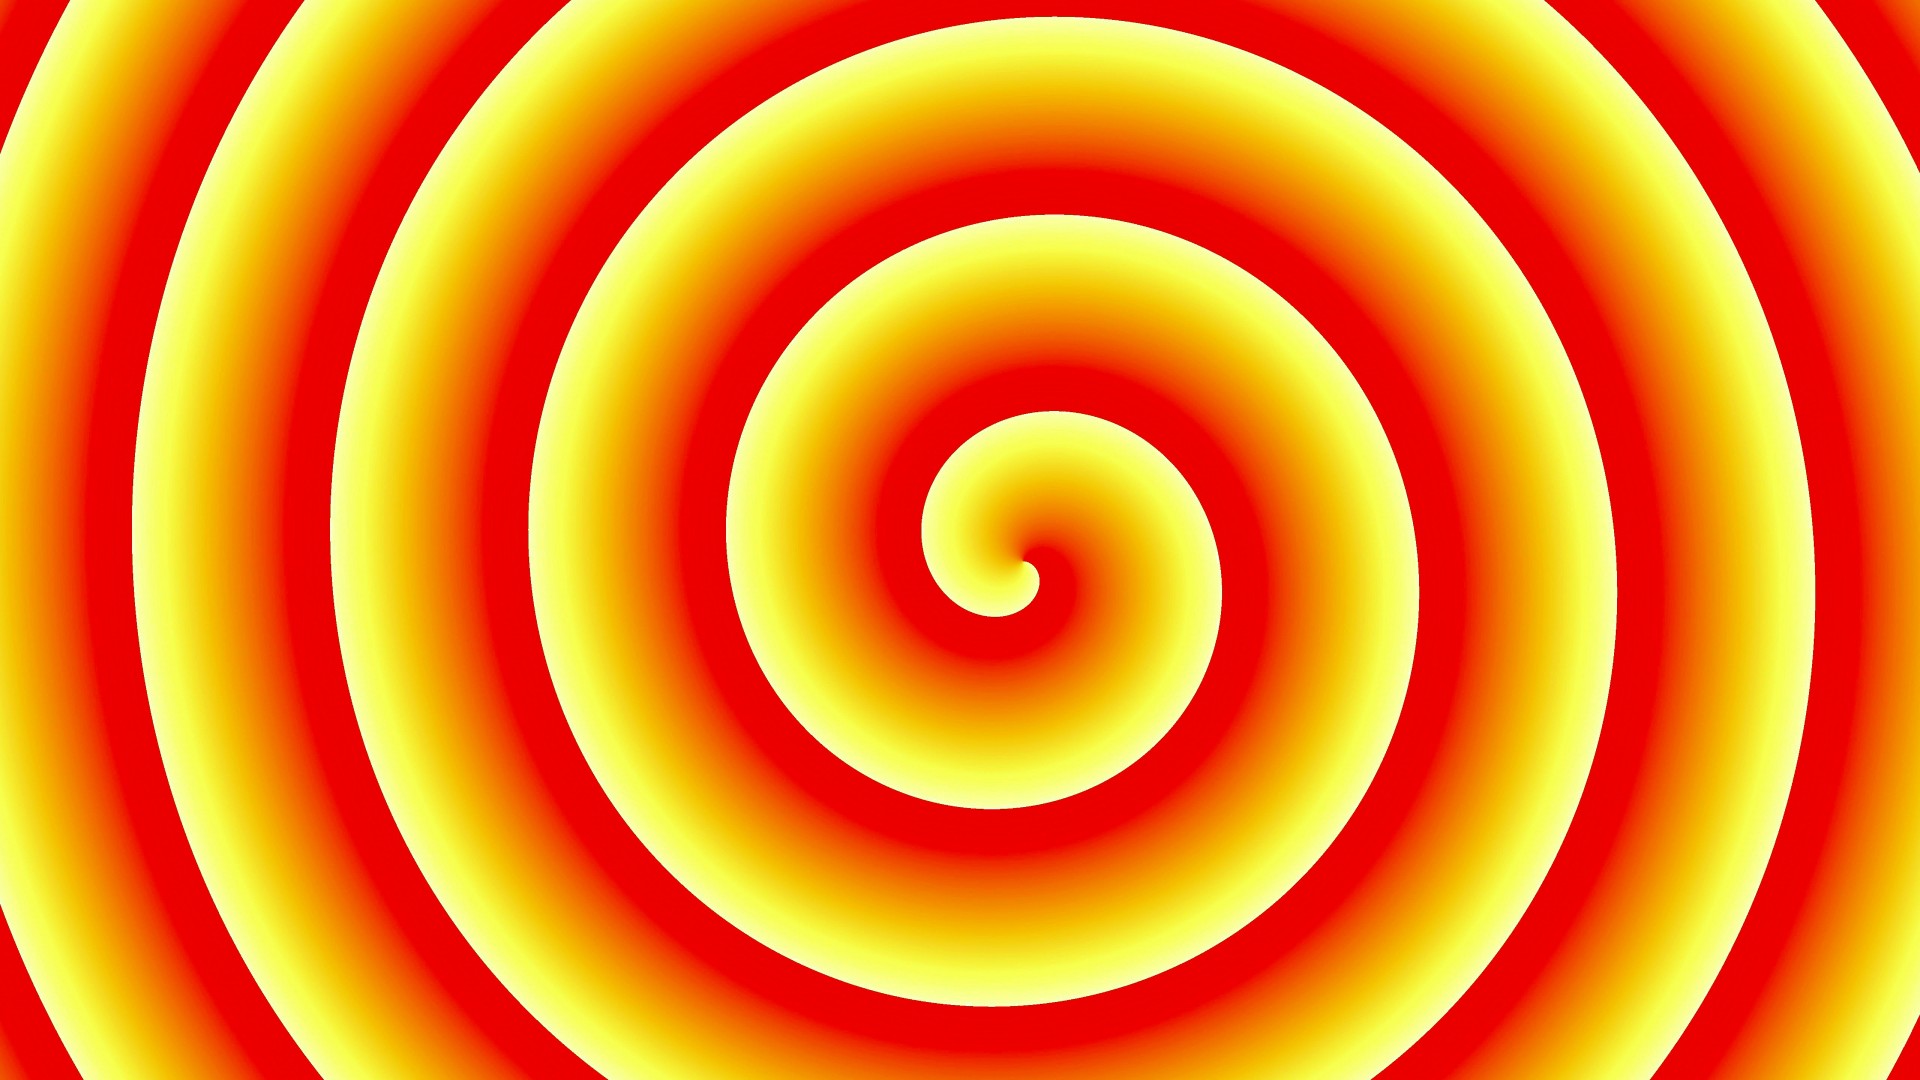 Red Yellow Hypnotic Background Free Stock Photo - Public ...